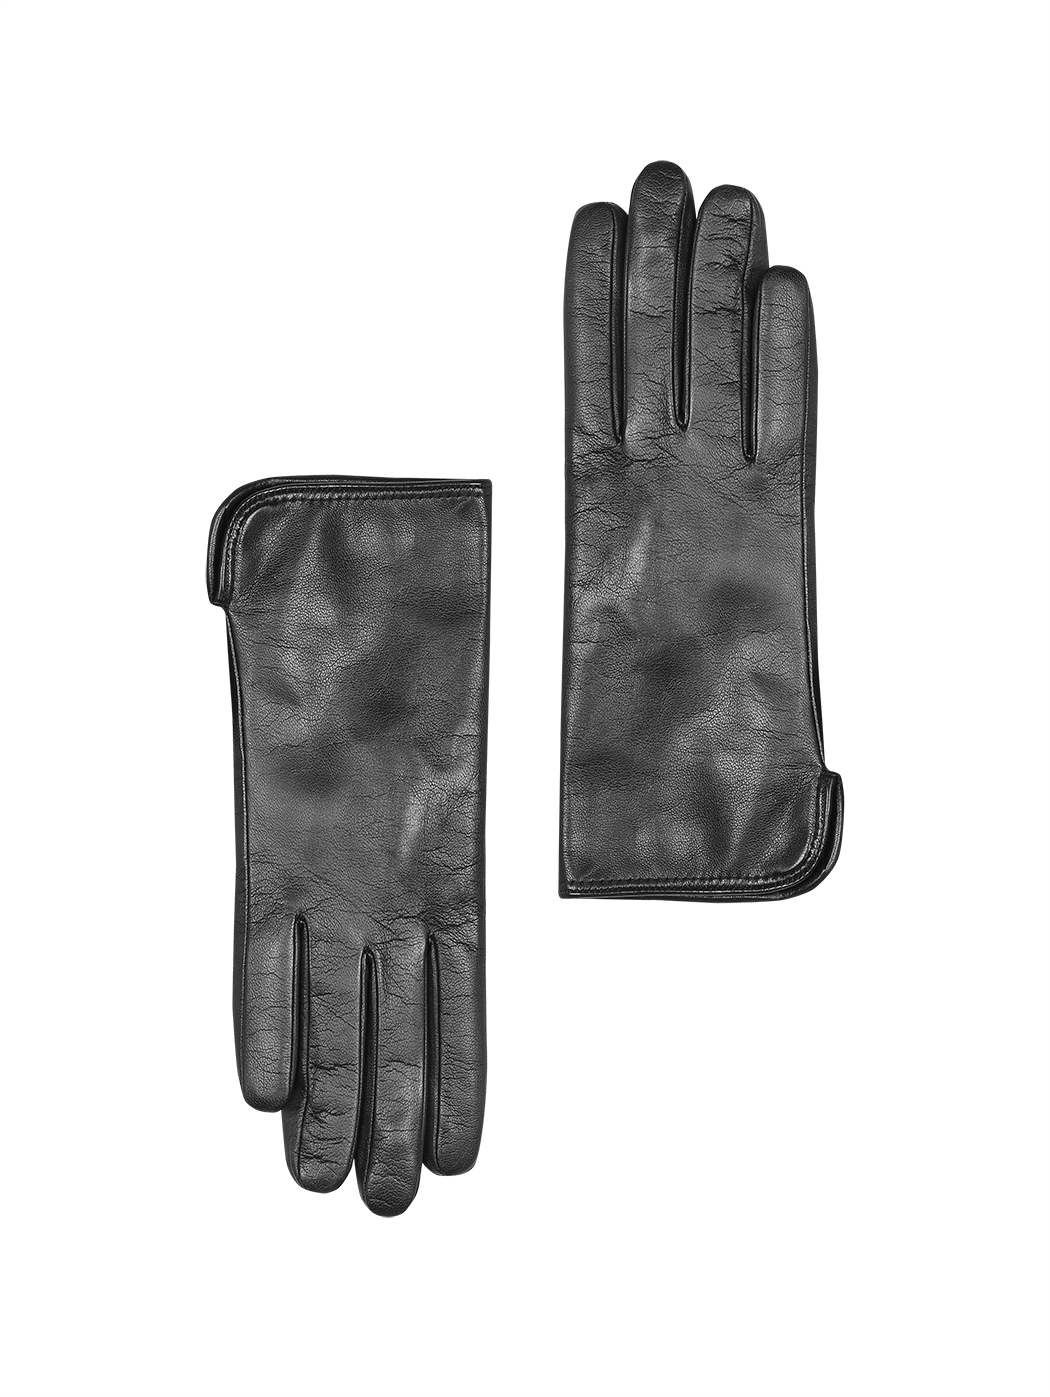 Women's Lambskin Gloves With Cashmere Lining Black